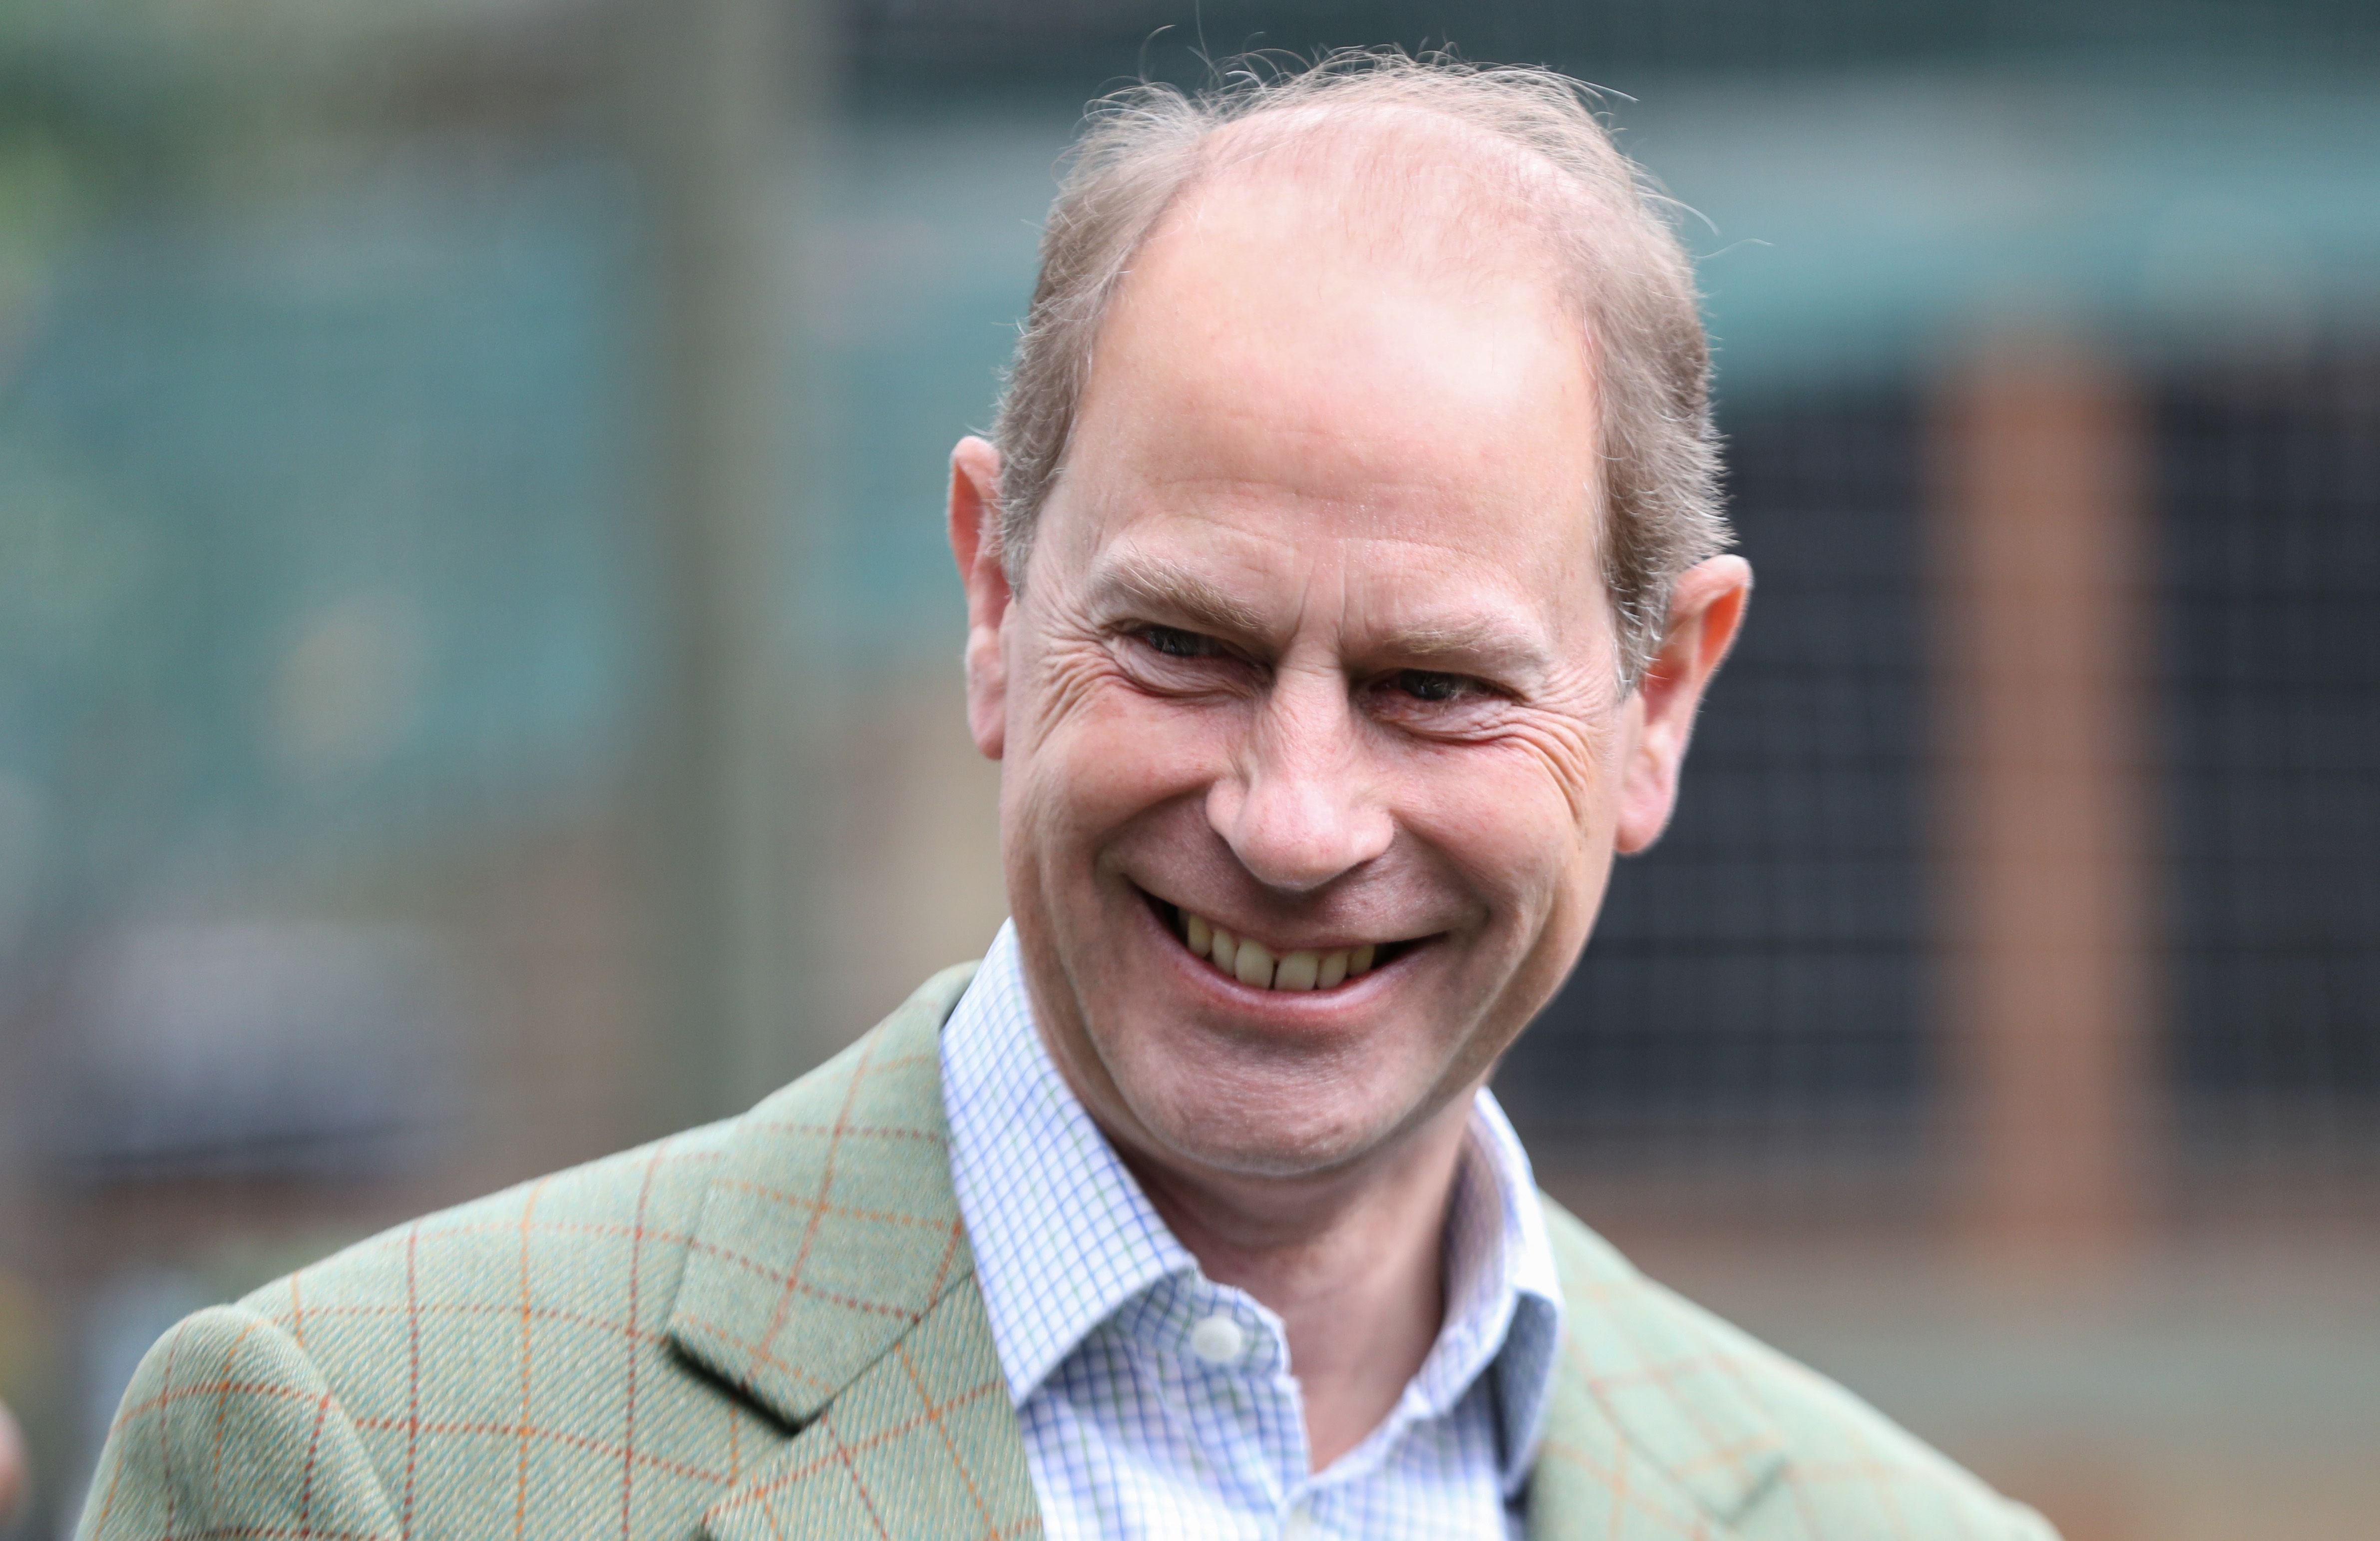 Prince Edward, Earl of Wessex smiles during his visit to Vauxhall City Farm with Sophie, Countess of Wessex on October 01, 2020 | Getty Images